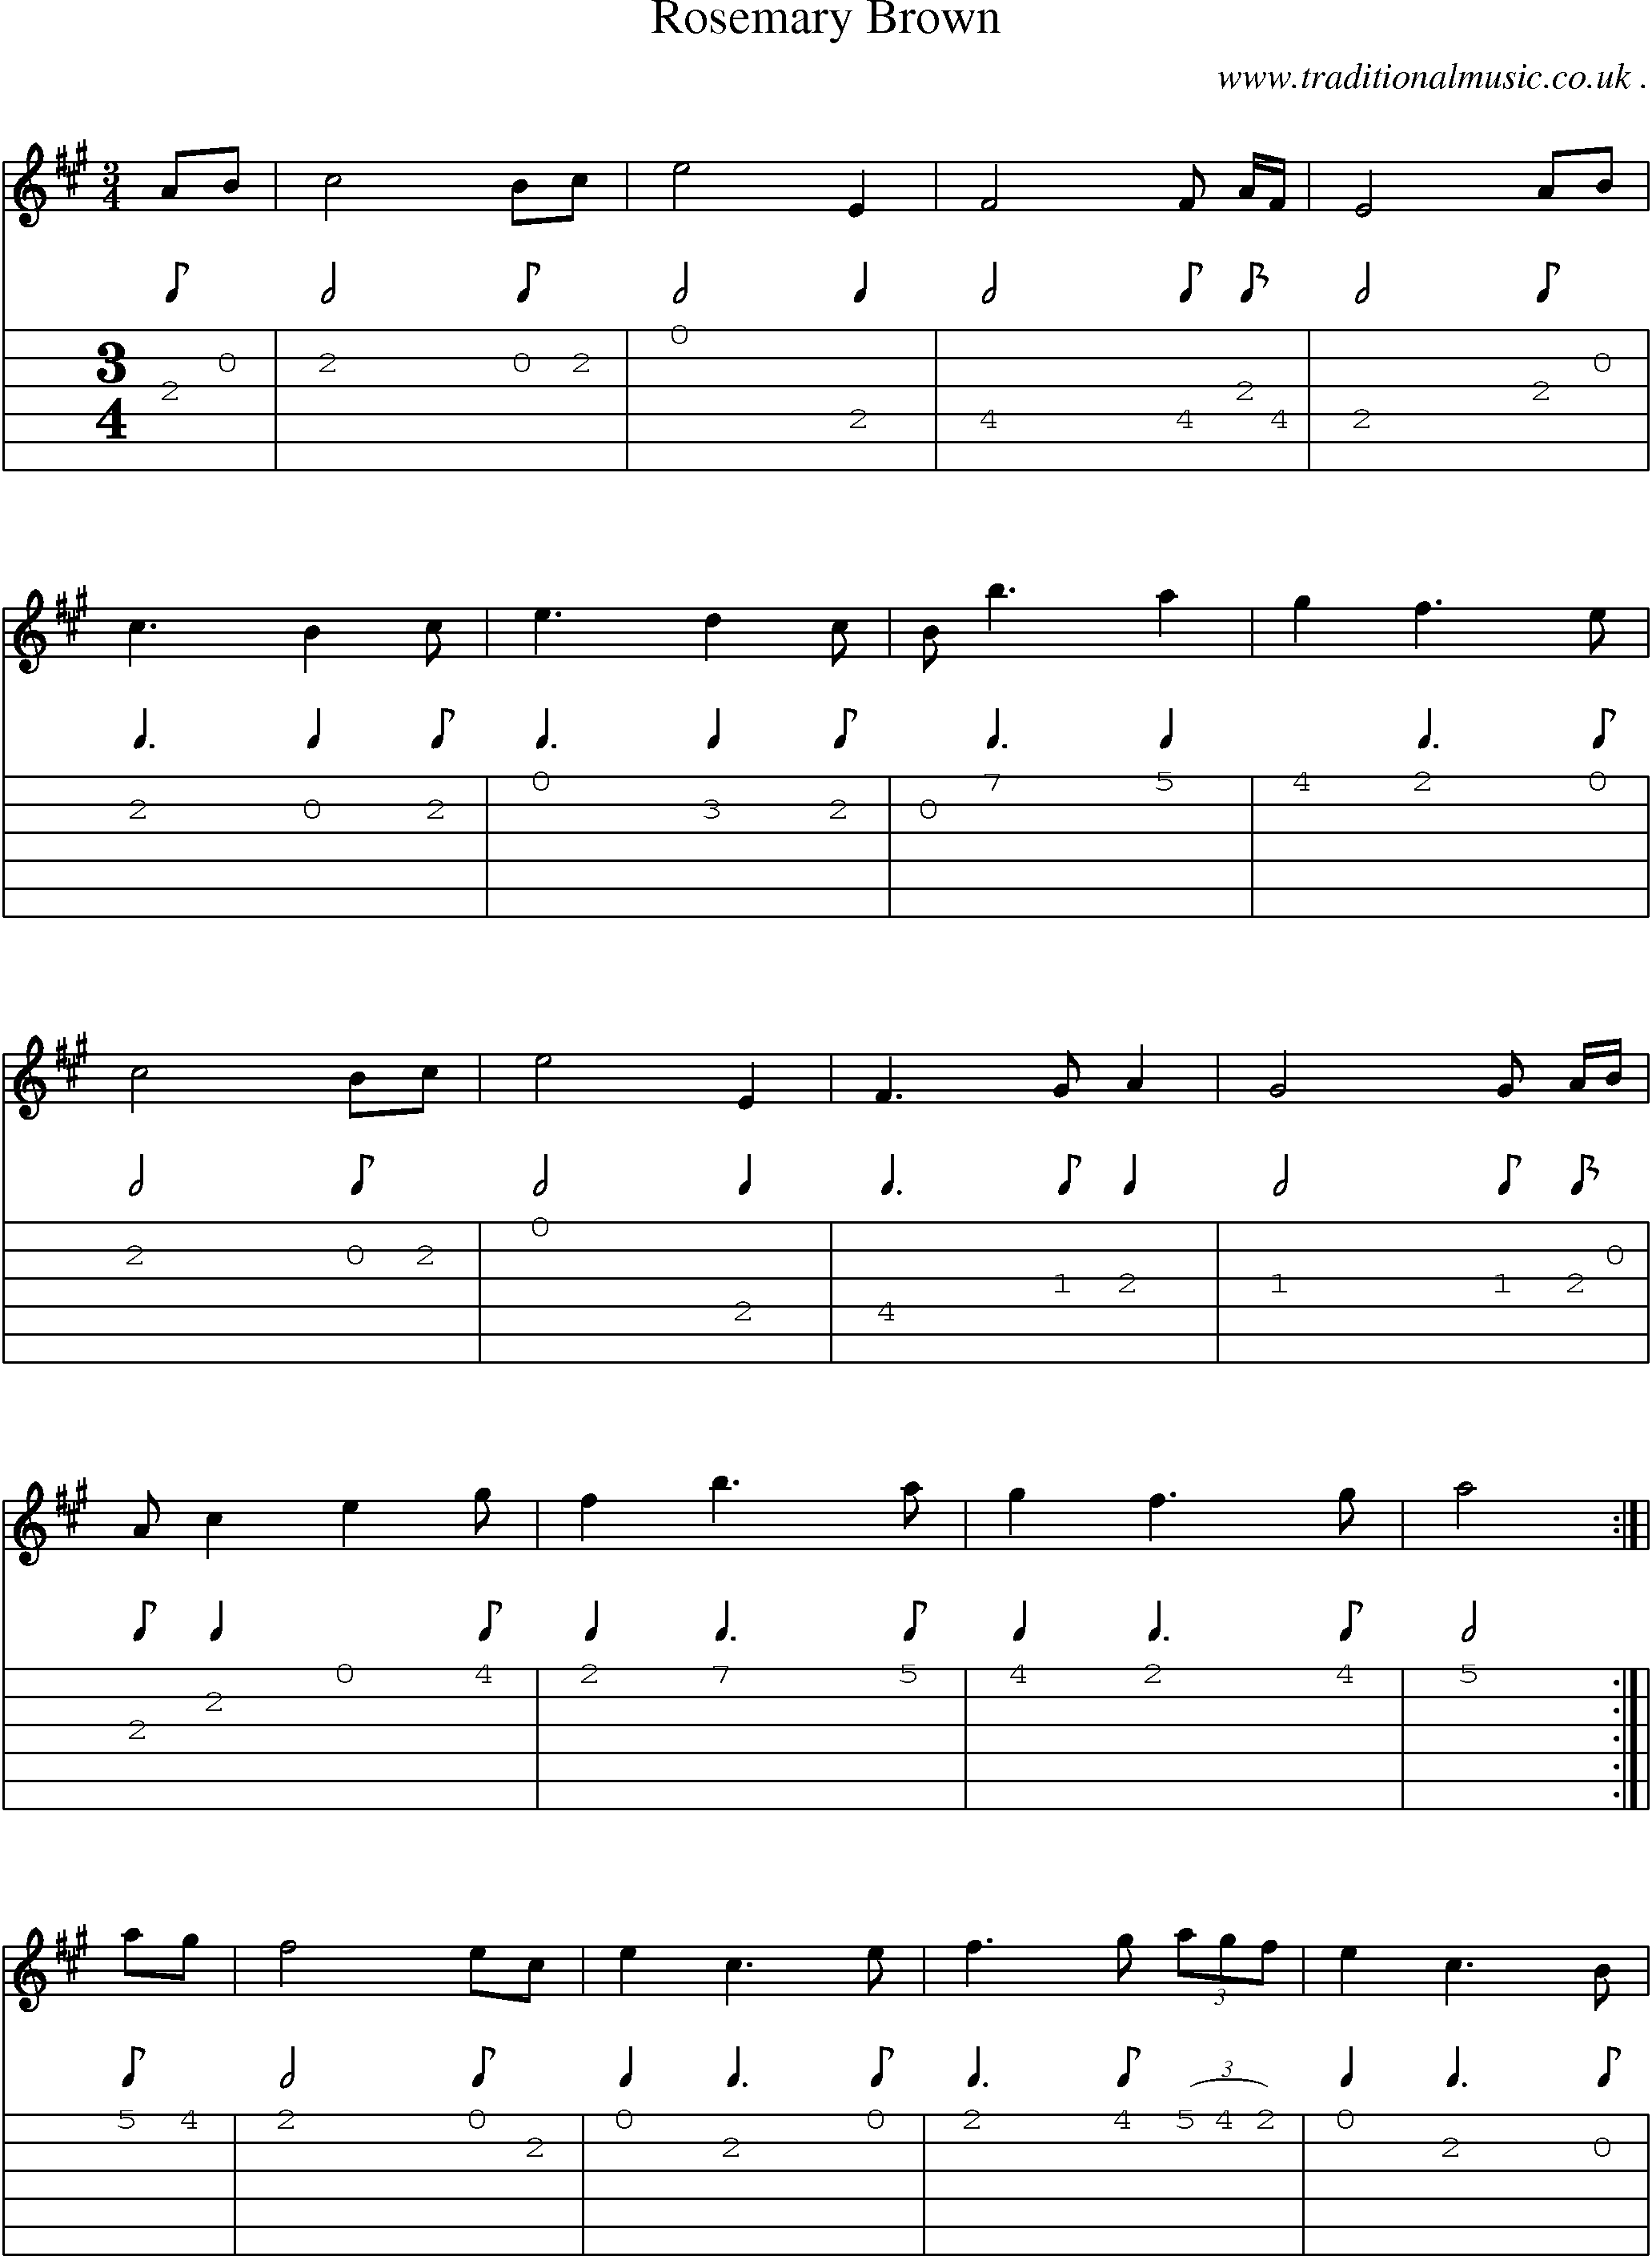 Sheet-Music and Guitar Tabs for Rosemary Brown